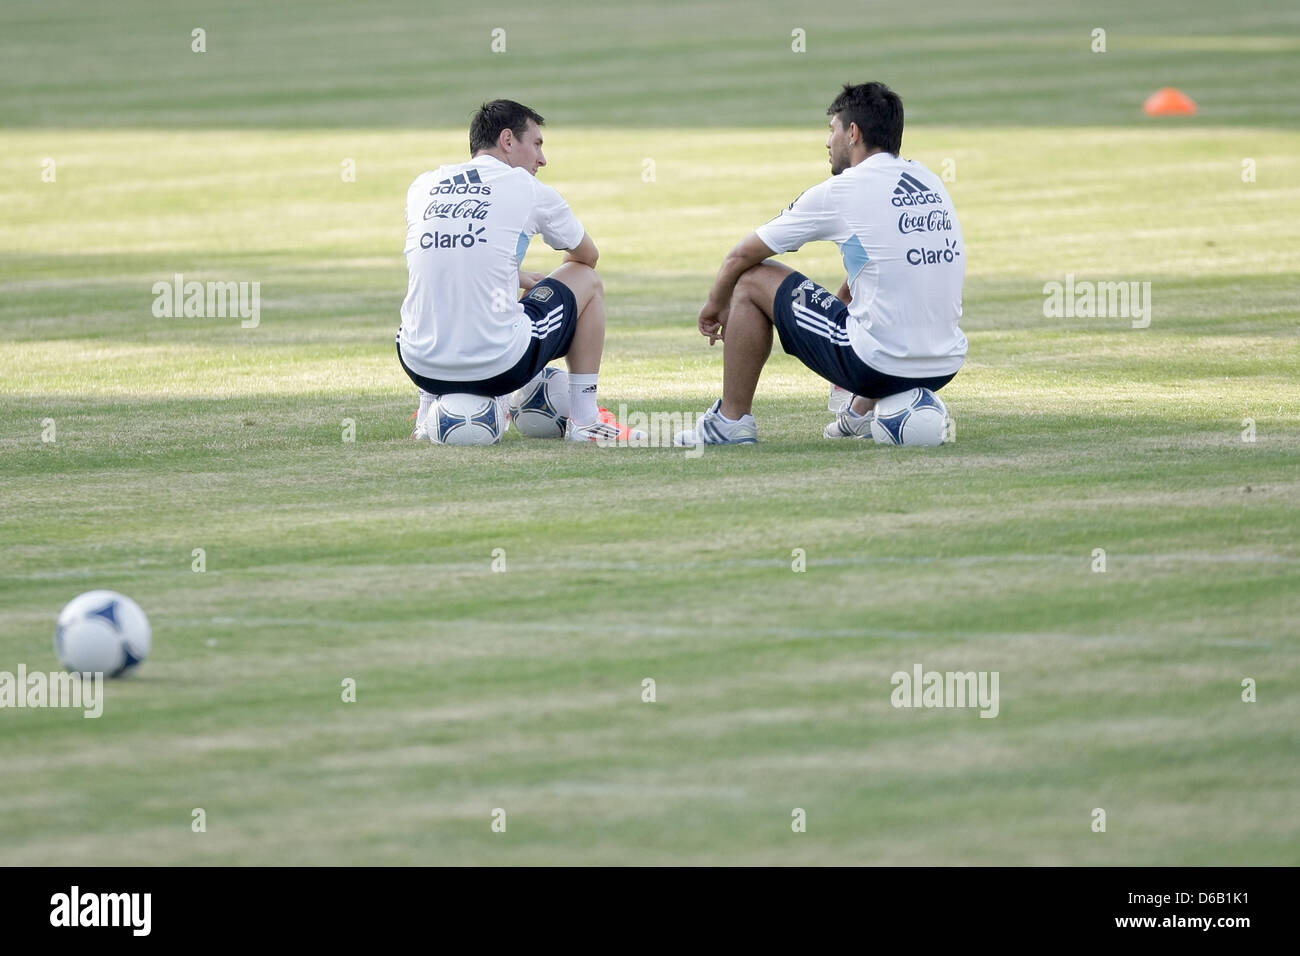 Argentine player Lionel Messi (L) talks to teammate Sergio 'Kun' Aguero during a practice session of the Argentine national soccer squad at the Sportpark soccer stadium in Neu-Isenburg, Germany, 13 August 2012. The Argentine  soccer squad is preparing for the international soccer match against Germany which is due to take place in the Commerzbank-Arena soccer stadium in Frankfurt o Stock Photo